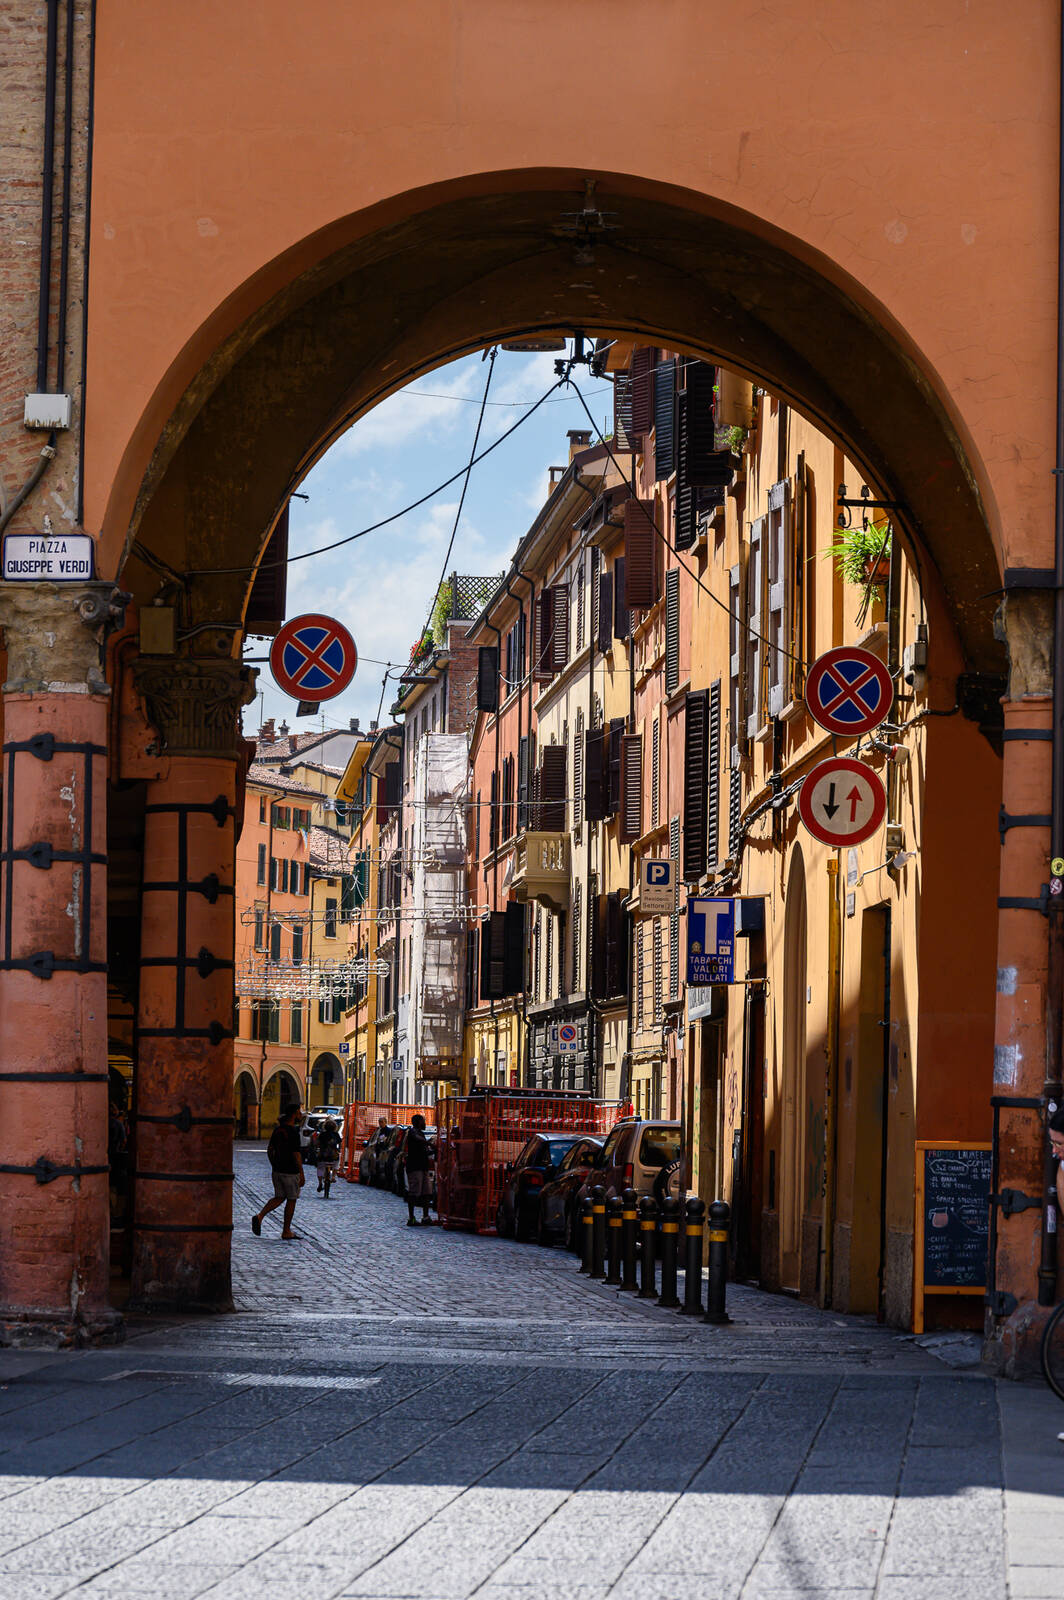 Image of Piazza Giuseppe Verdi by Sue Wolfe